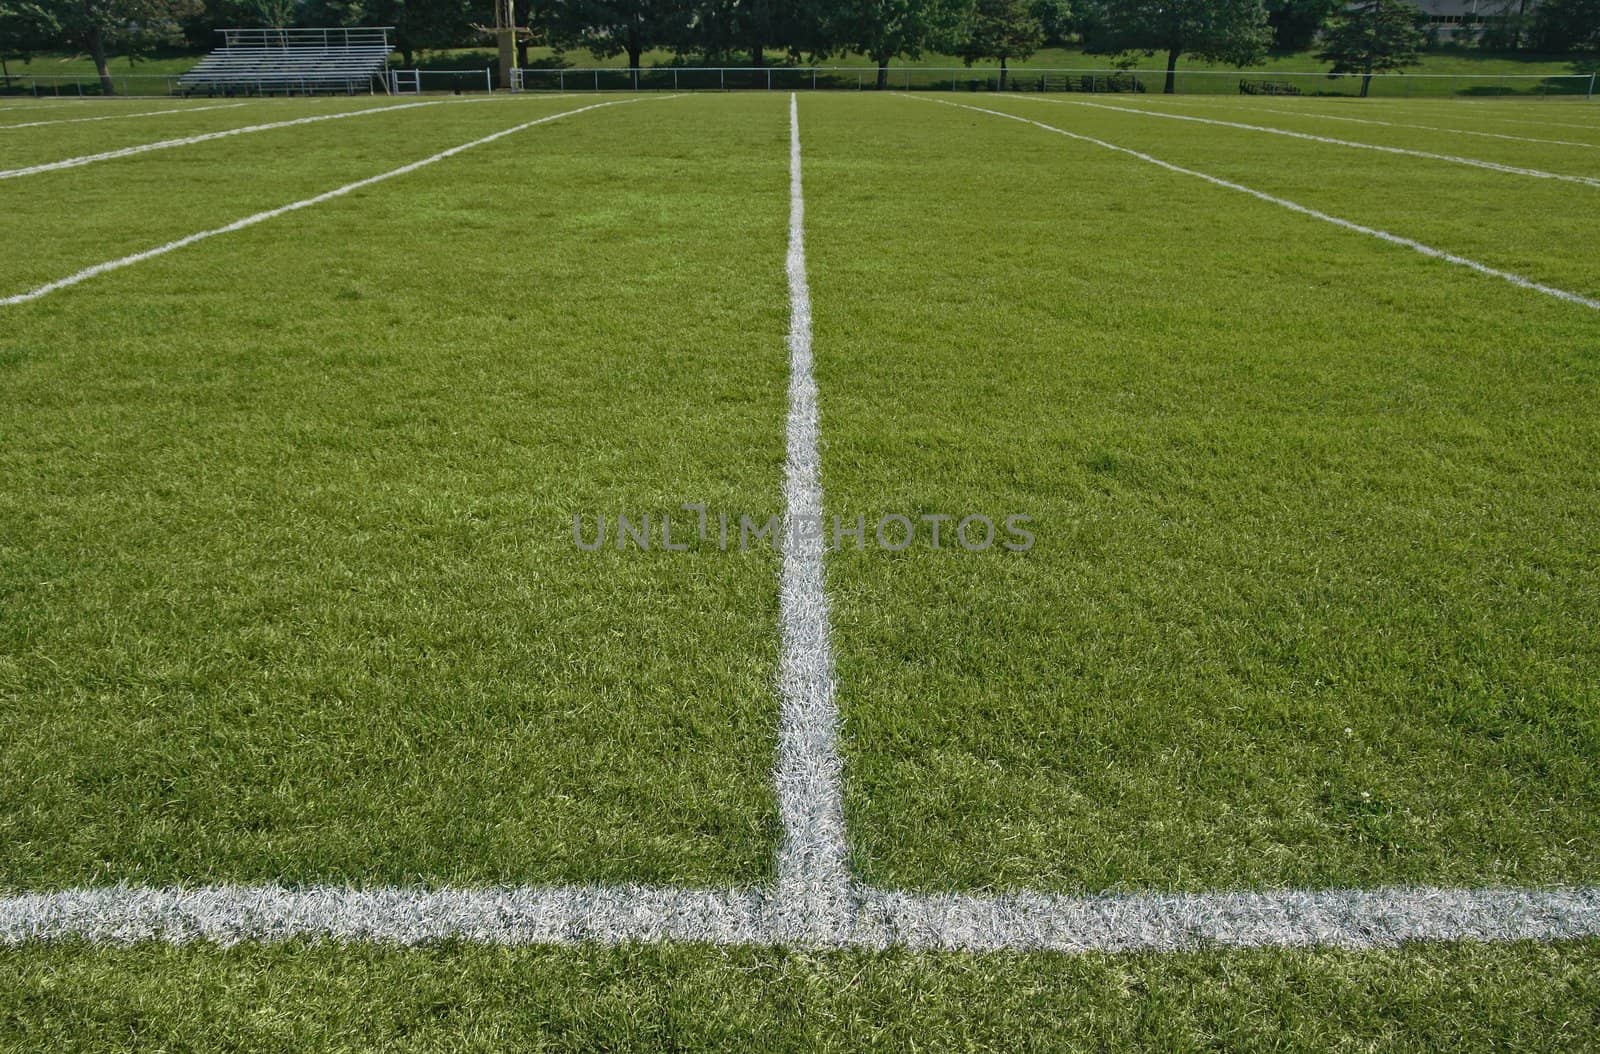 White boundary lines of American football playing field.